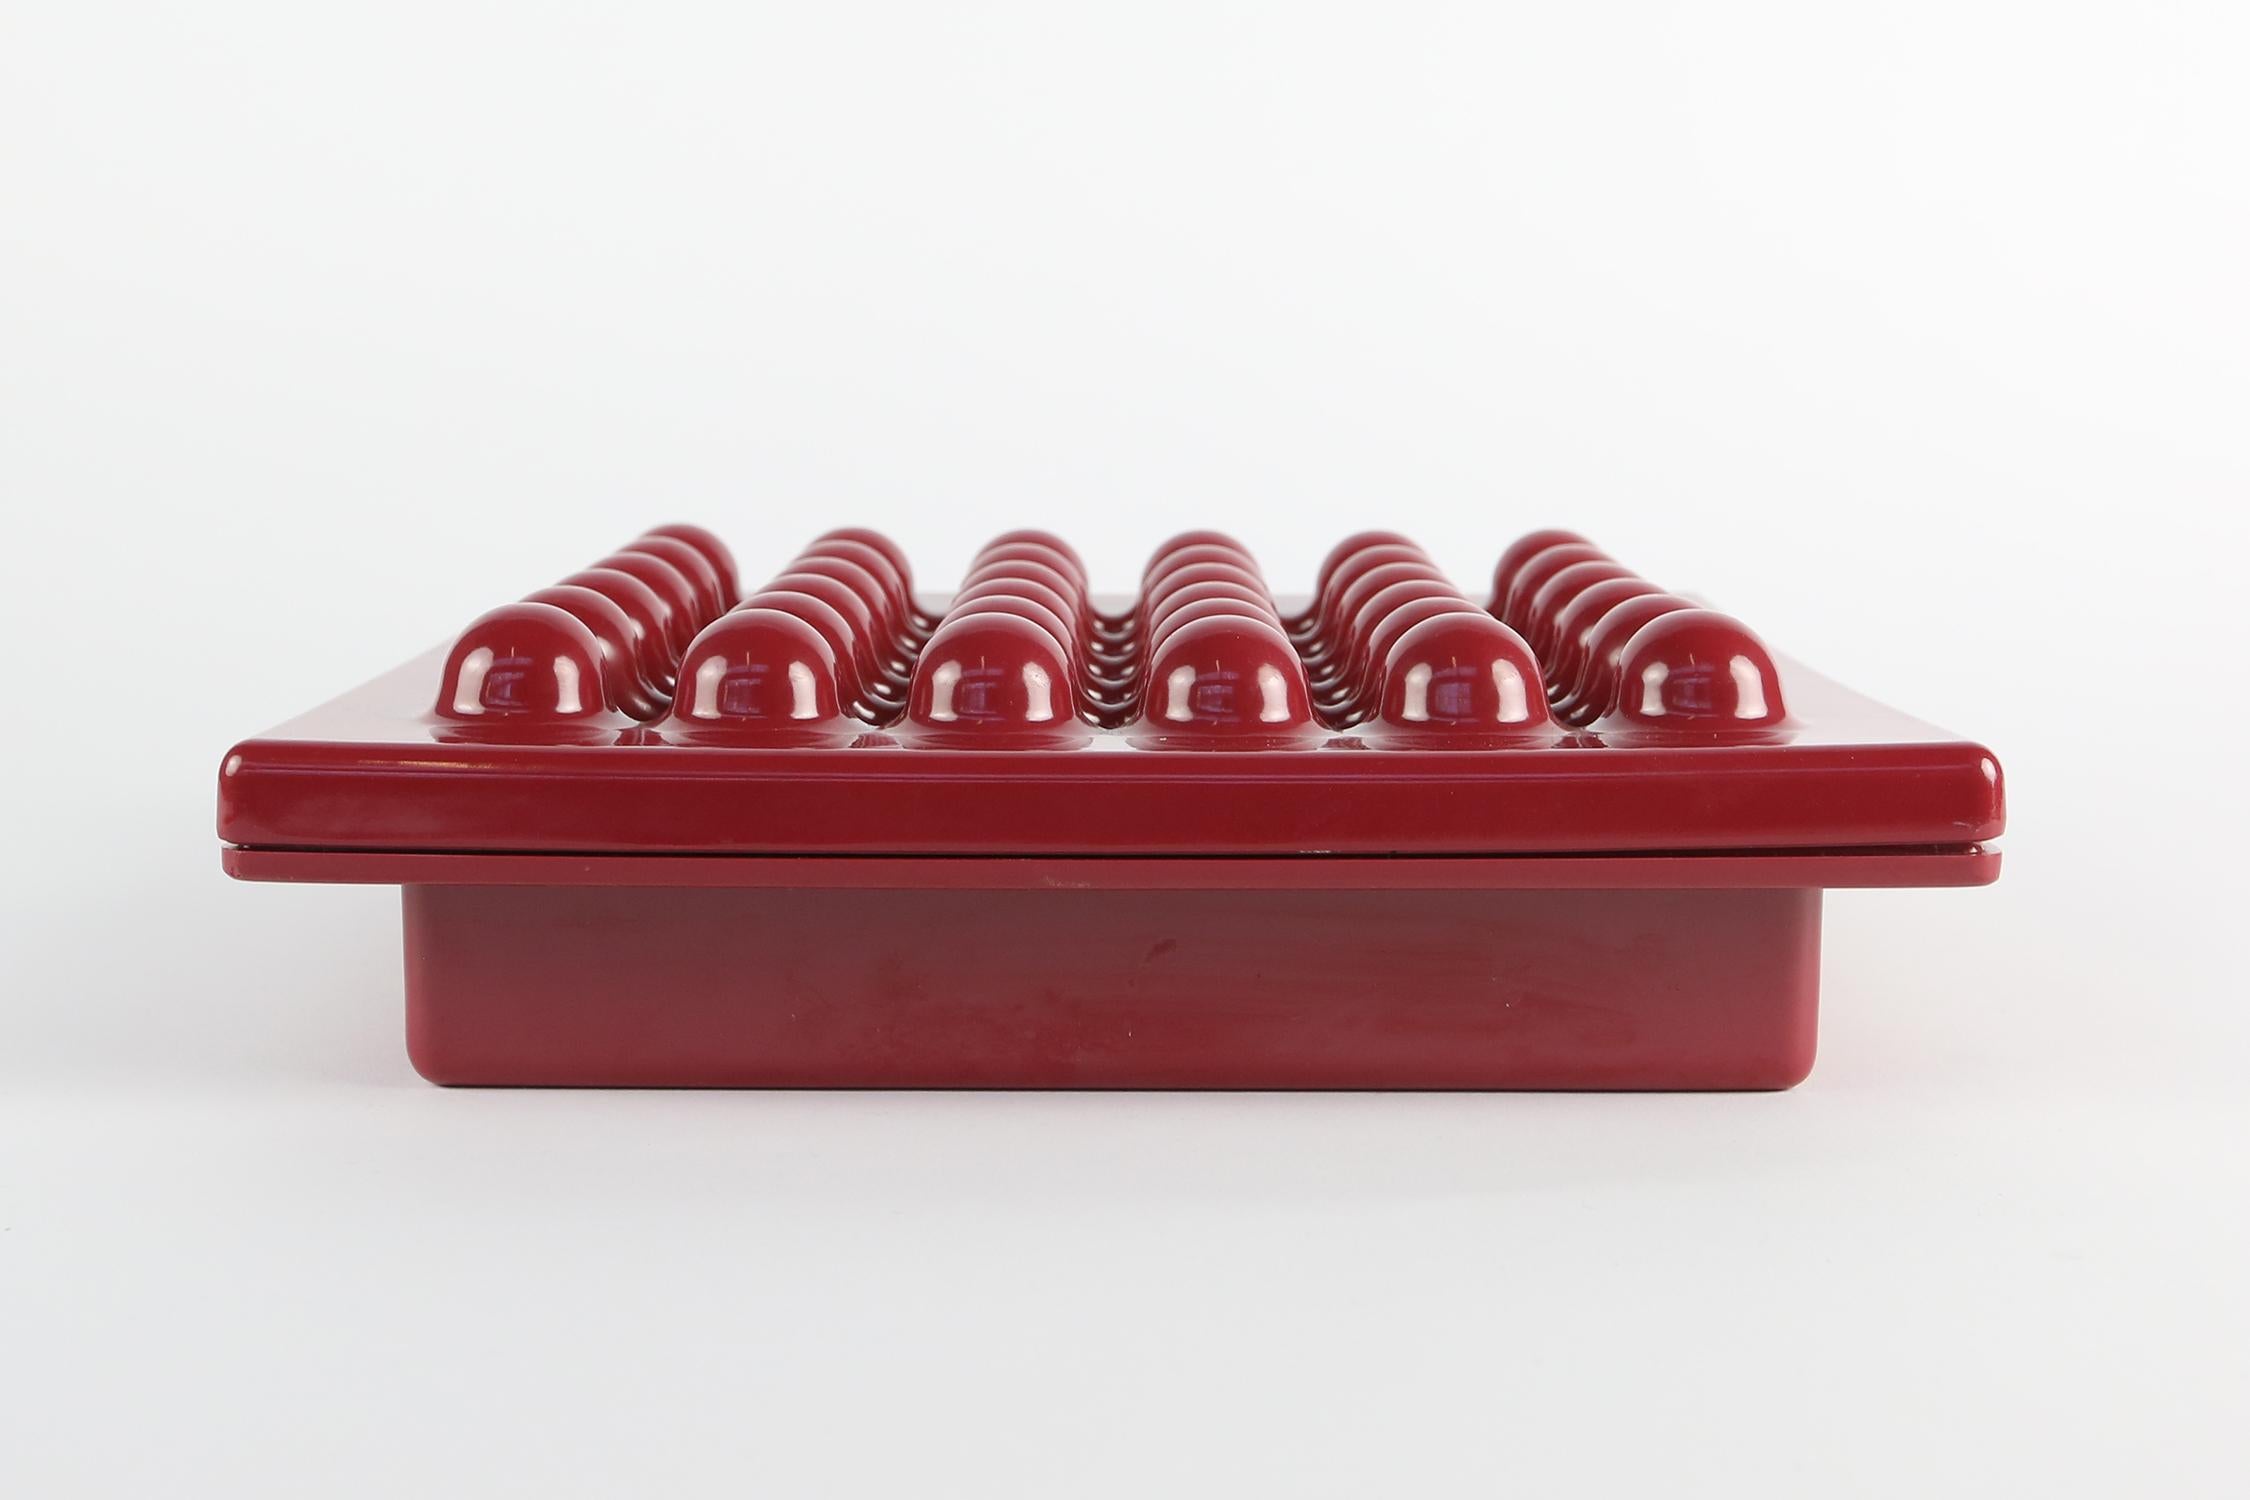 Large wine red ashtray, Ettore Sottsass for Olivetti Synthesis, Sistema 45 series, 1972 iconic object from the revolutionary Synthesis 45 office furniture system, presented by Olivetti in 1973 and designed by Ettore Sottsass.